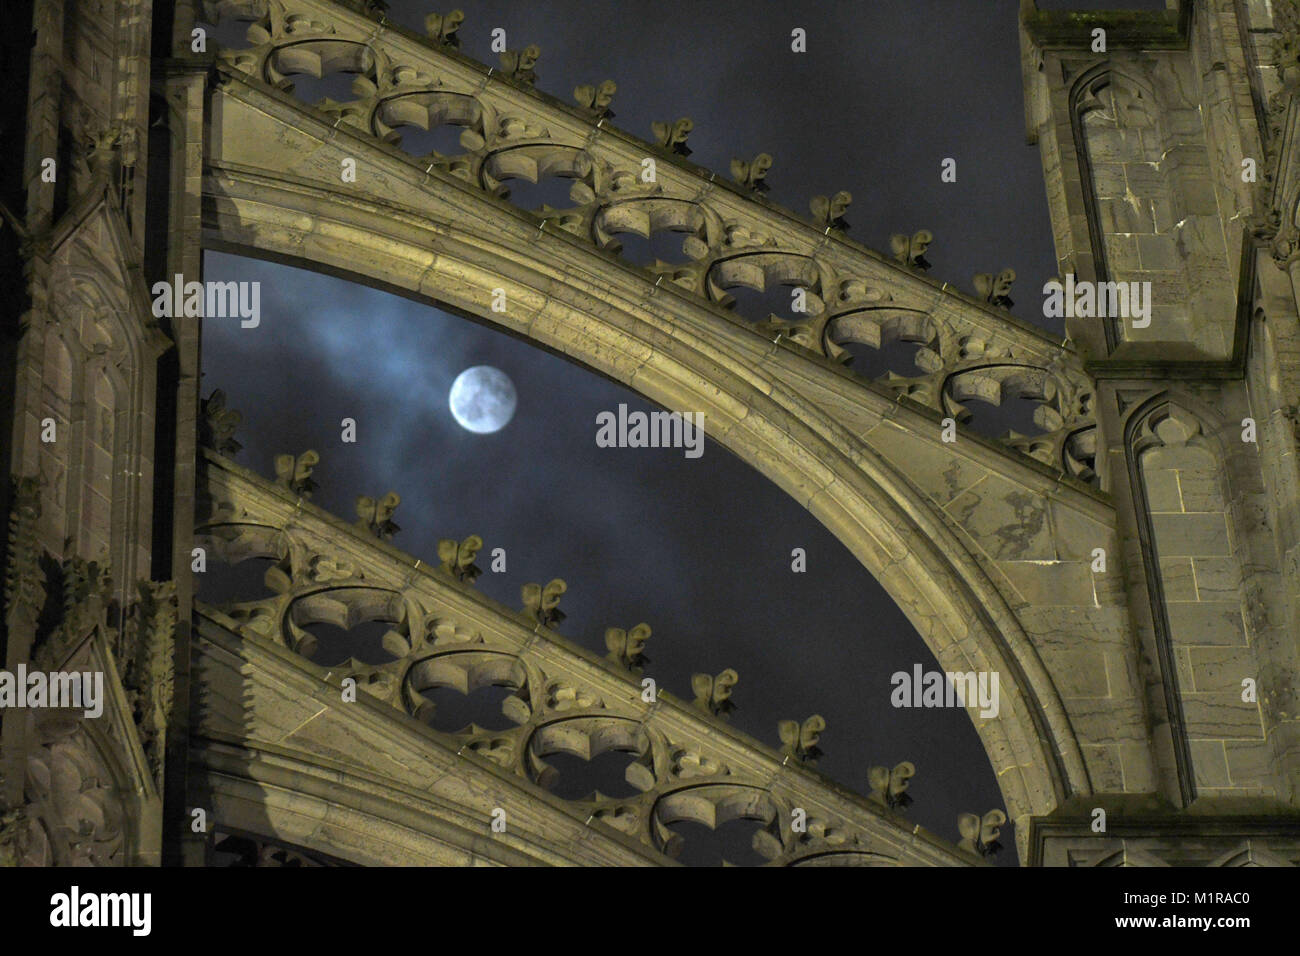 Cologne, Germany. 1st Feb, 2018. The full moon shines bright shortly after midnight, illuminating the Cathedral in Cologne, Germany, 1 February 2018. For the second time in a month the moon has shown its full face in the sky. It is especially close to earth and appears brighter and larger that usual. Credit: Henning Kaiser/dpa/Alamy Live News Stock Photo